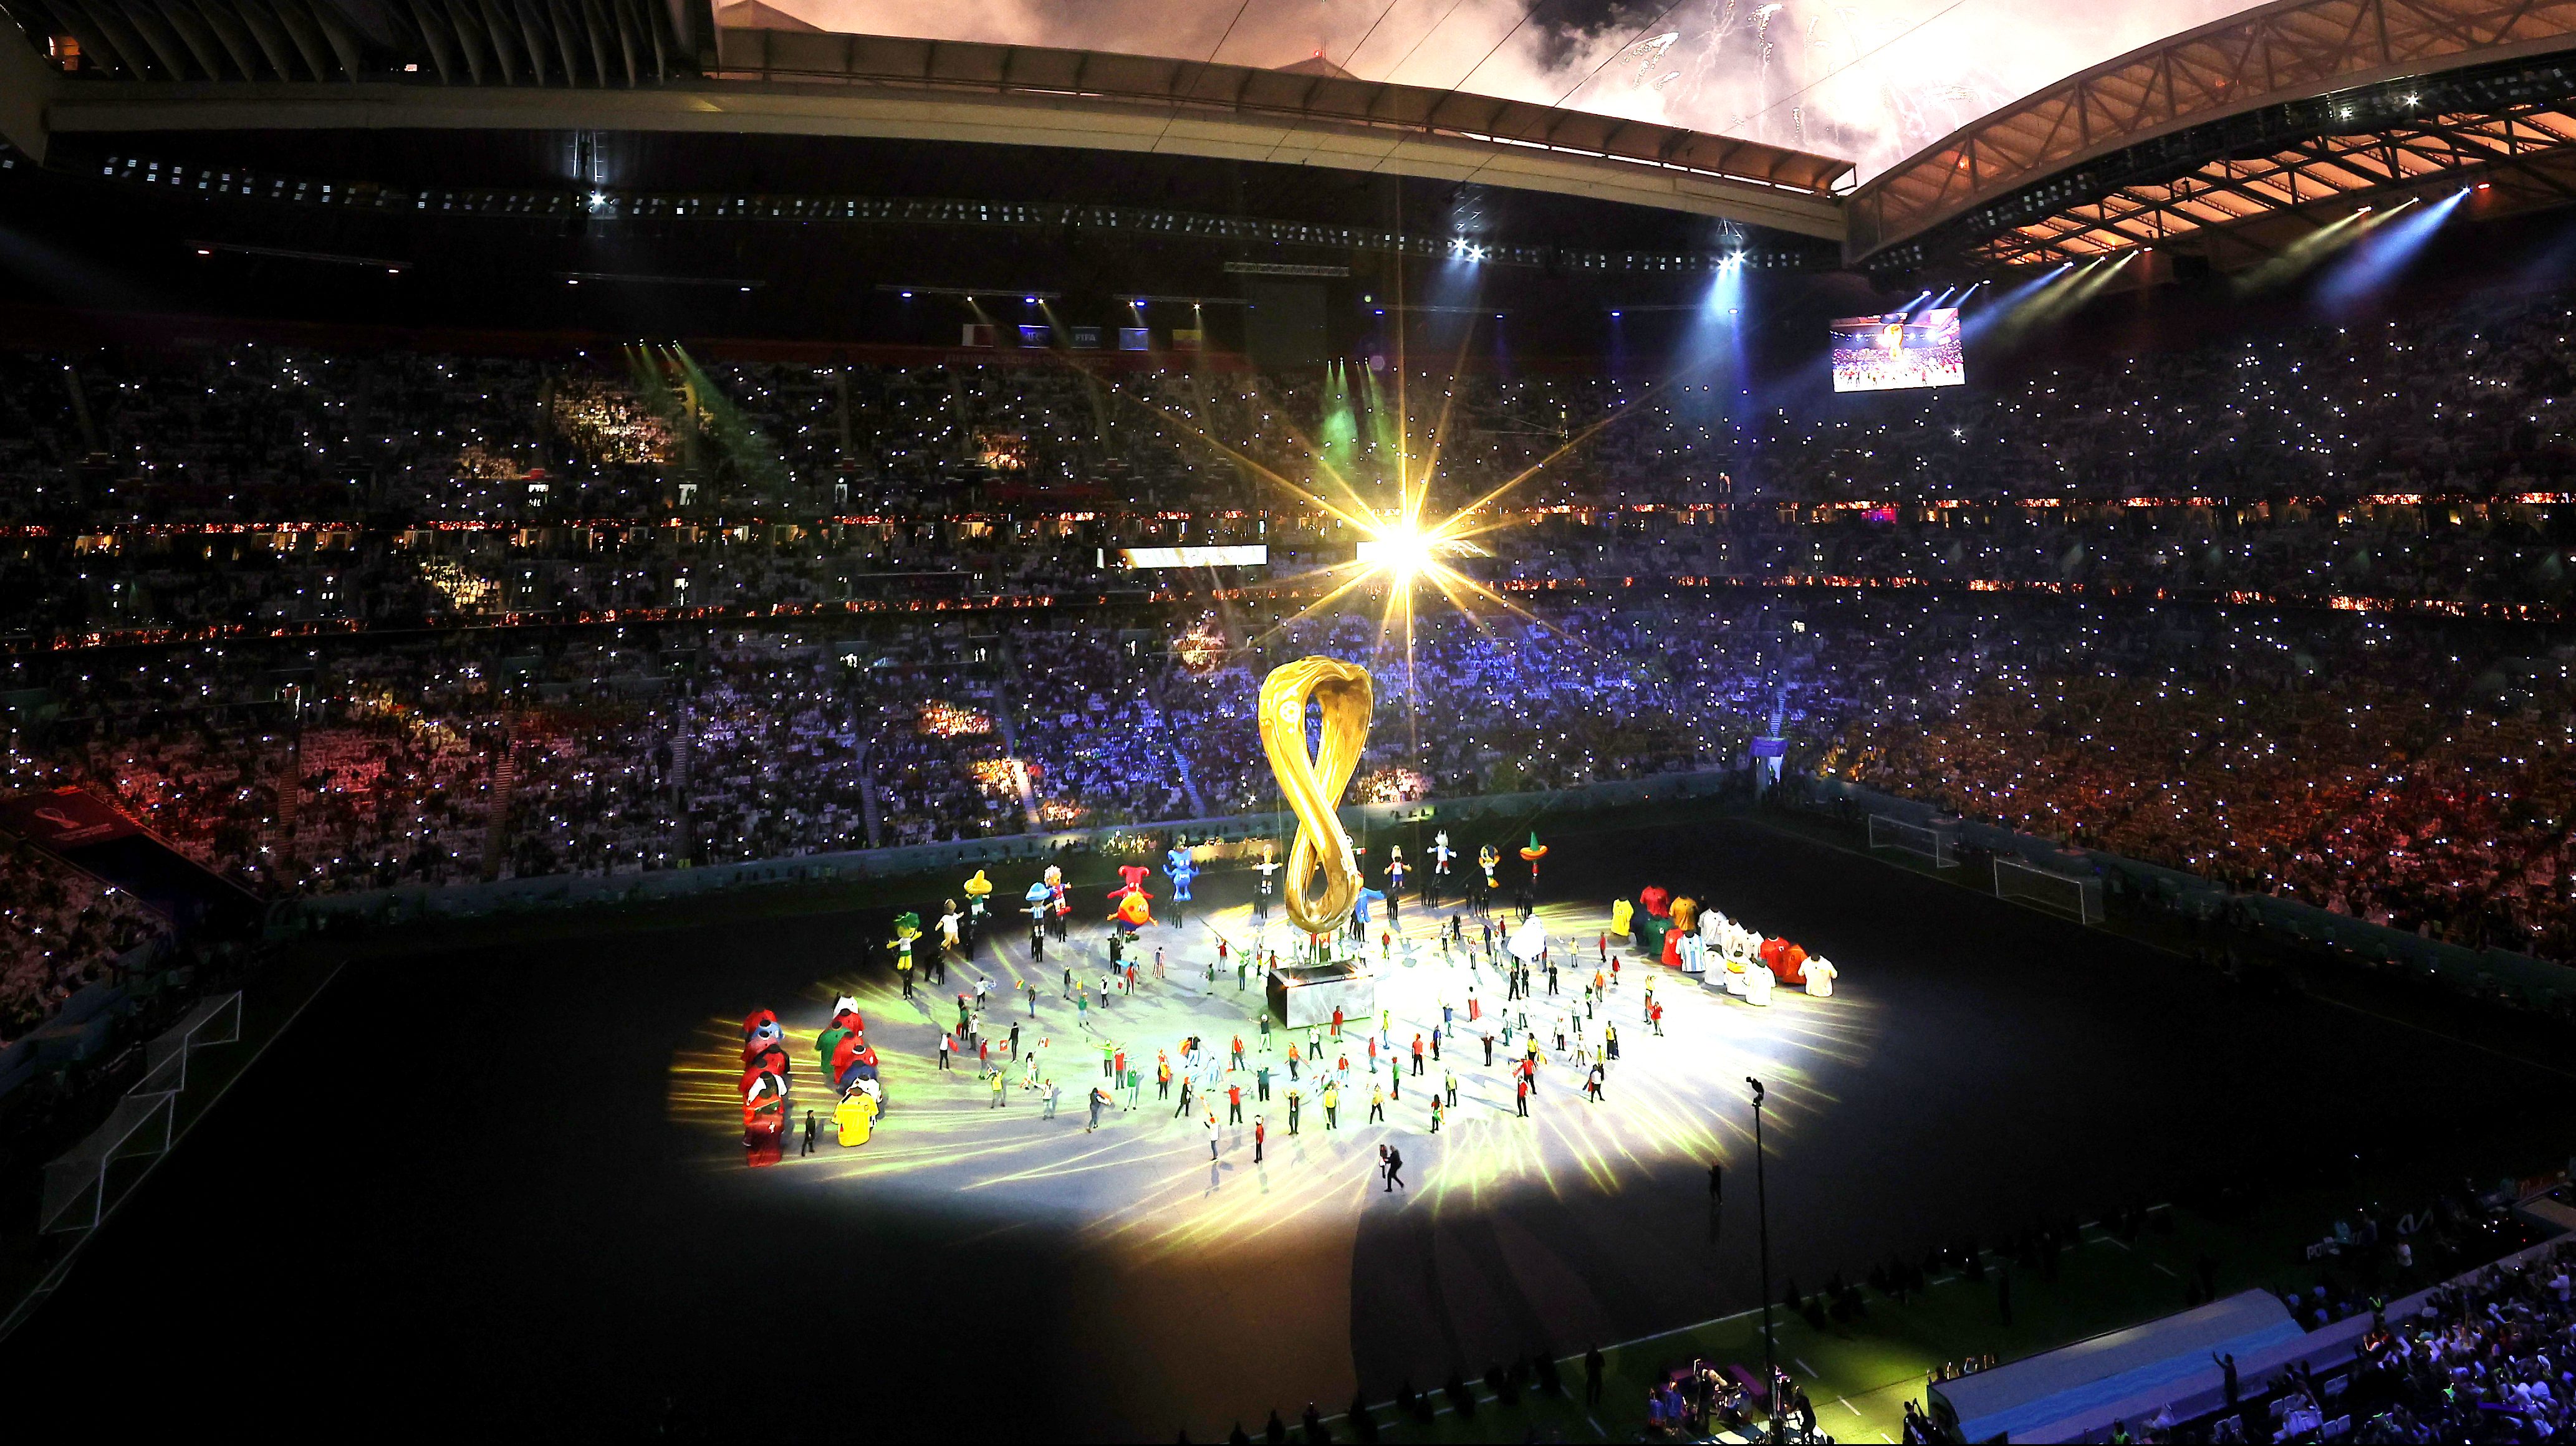 fifa world cup 2022 opening ceremony channel